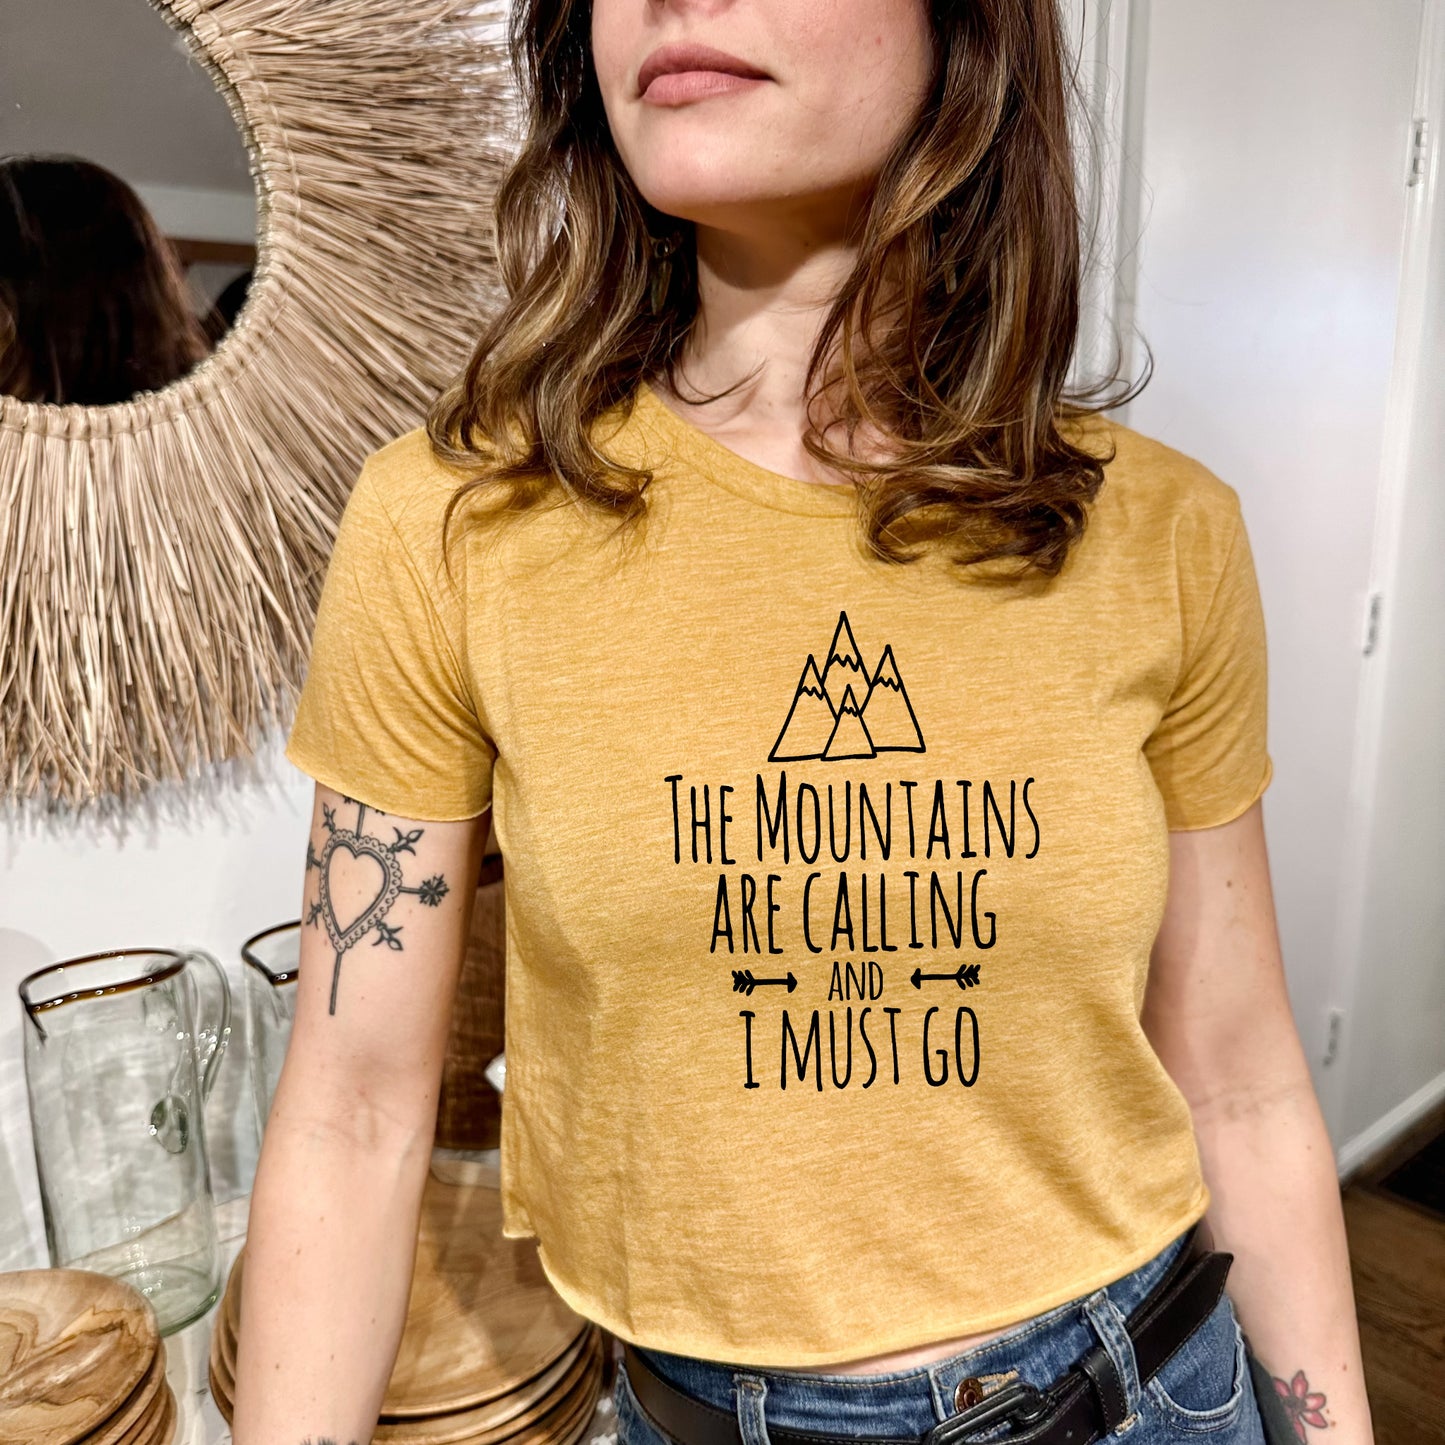 The Mountains Are Calling And I Must Go - Women's Crop Tee - Heather Gray or Gold